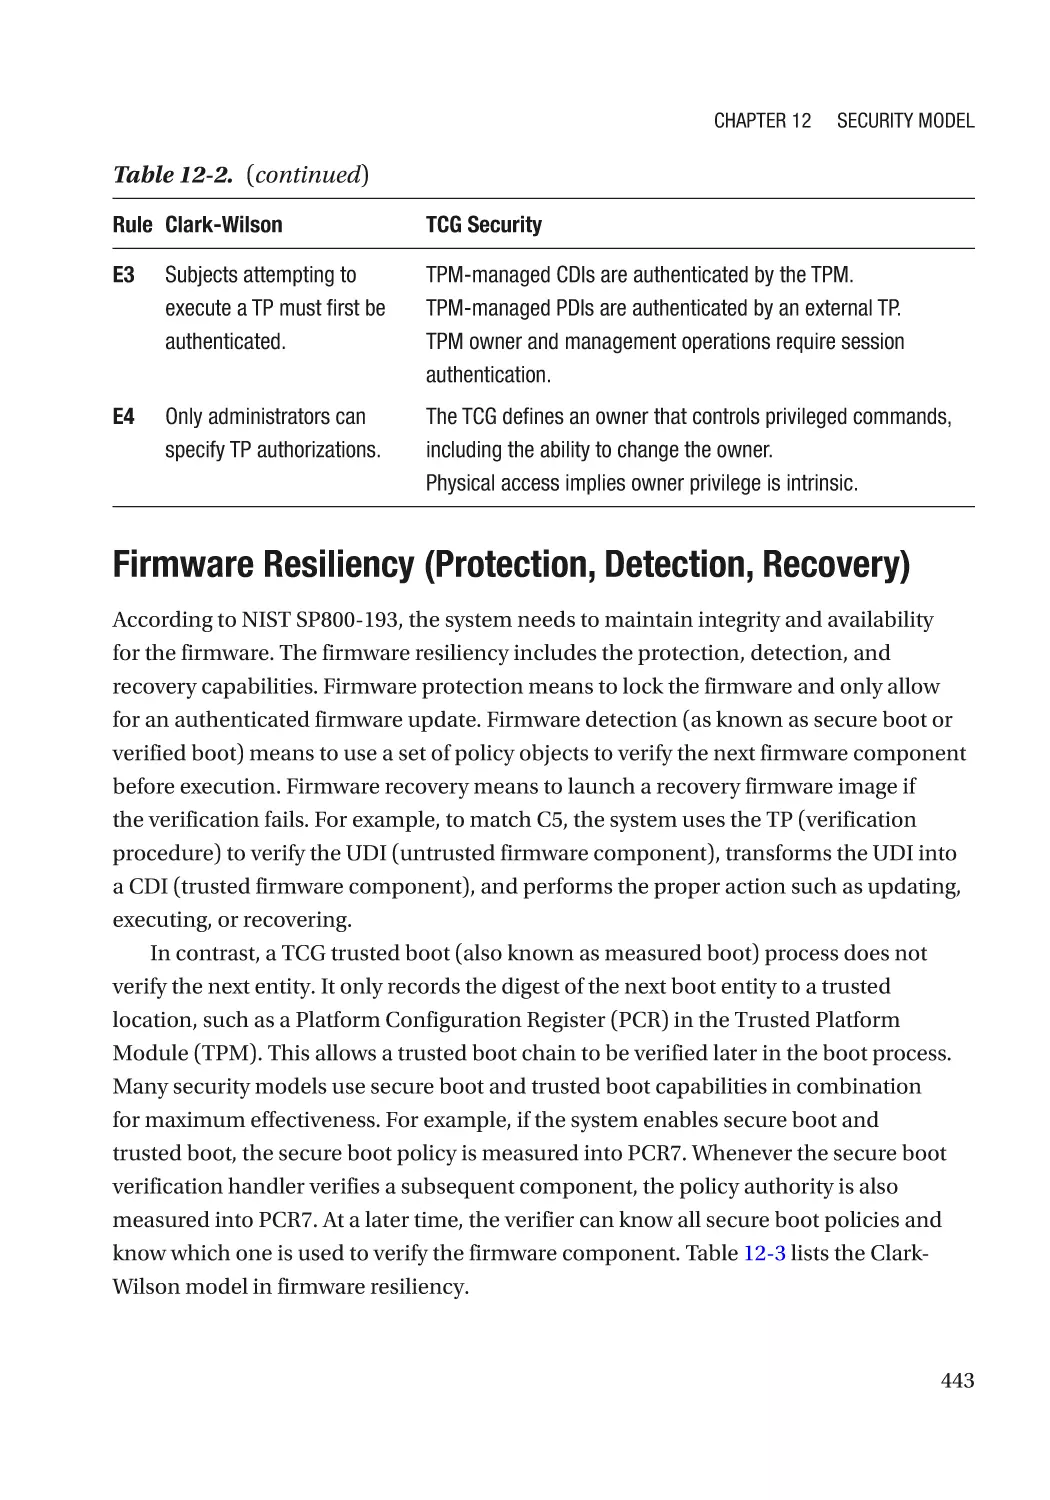 Firmware Resiliency (Protection, Detection, Recovery)